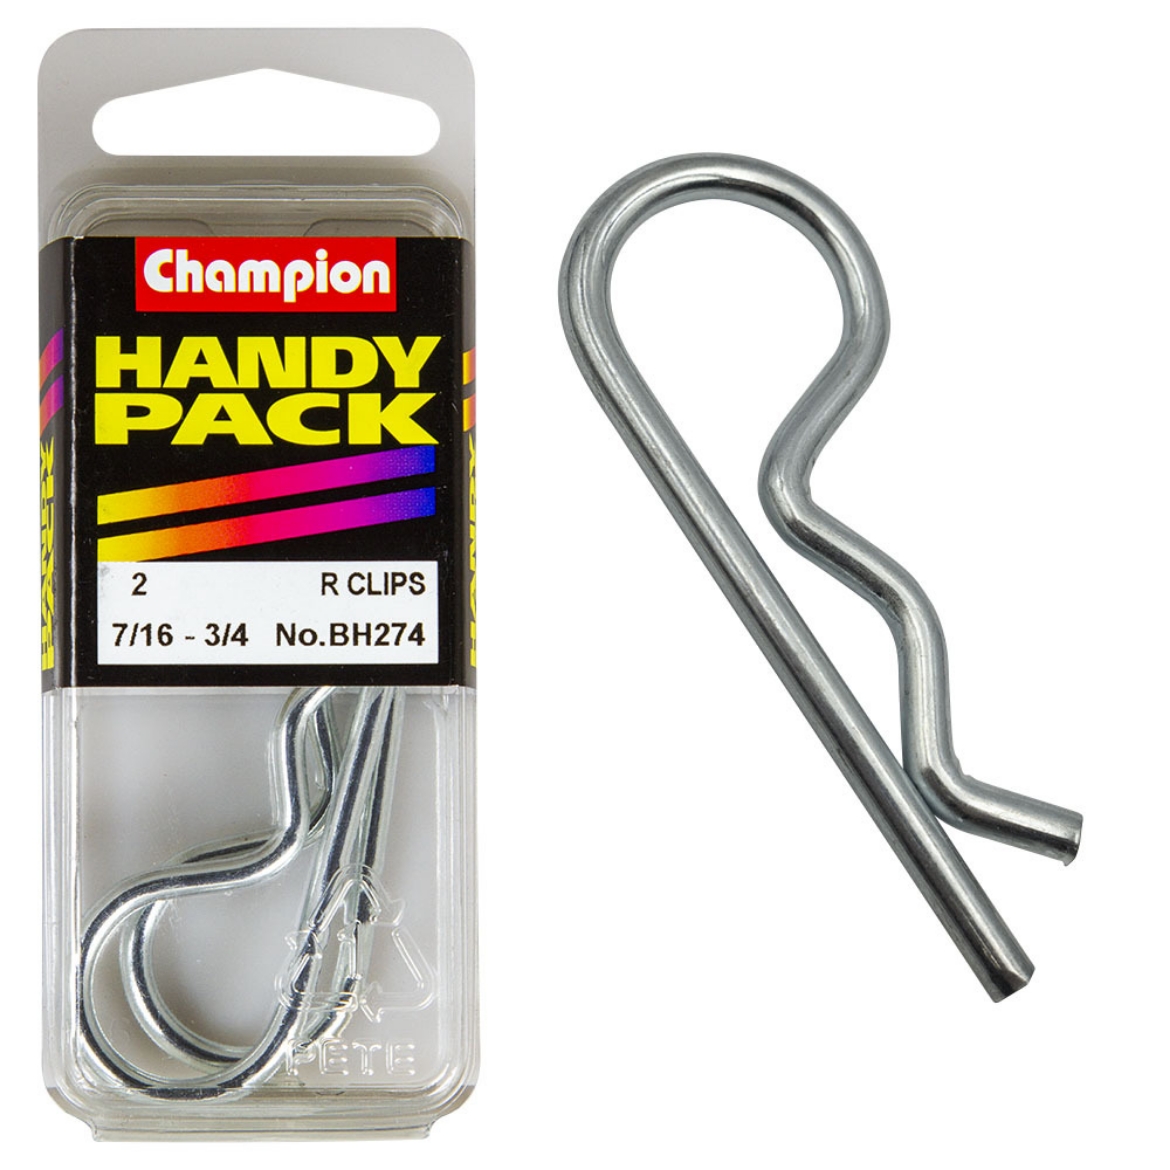 Picture of Handy Pk 'R' Clips 7/16 - 3/4 shaft RCL (Pkt.2)